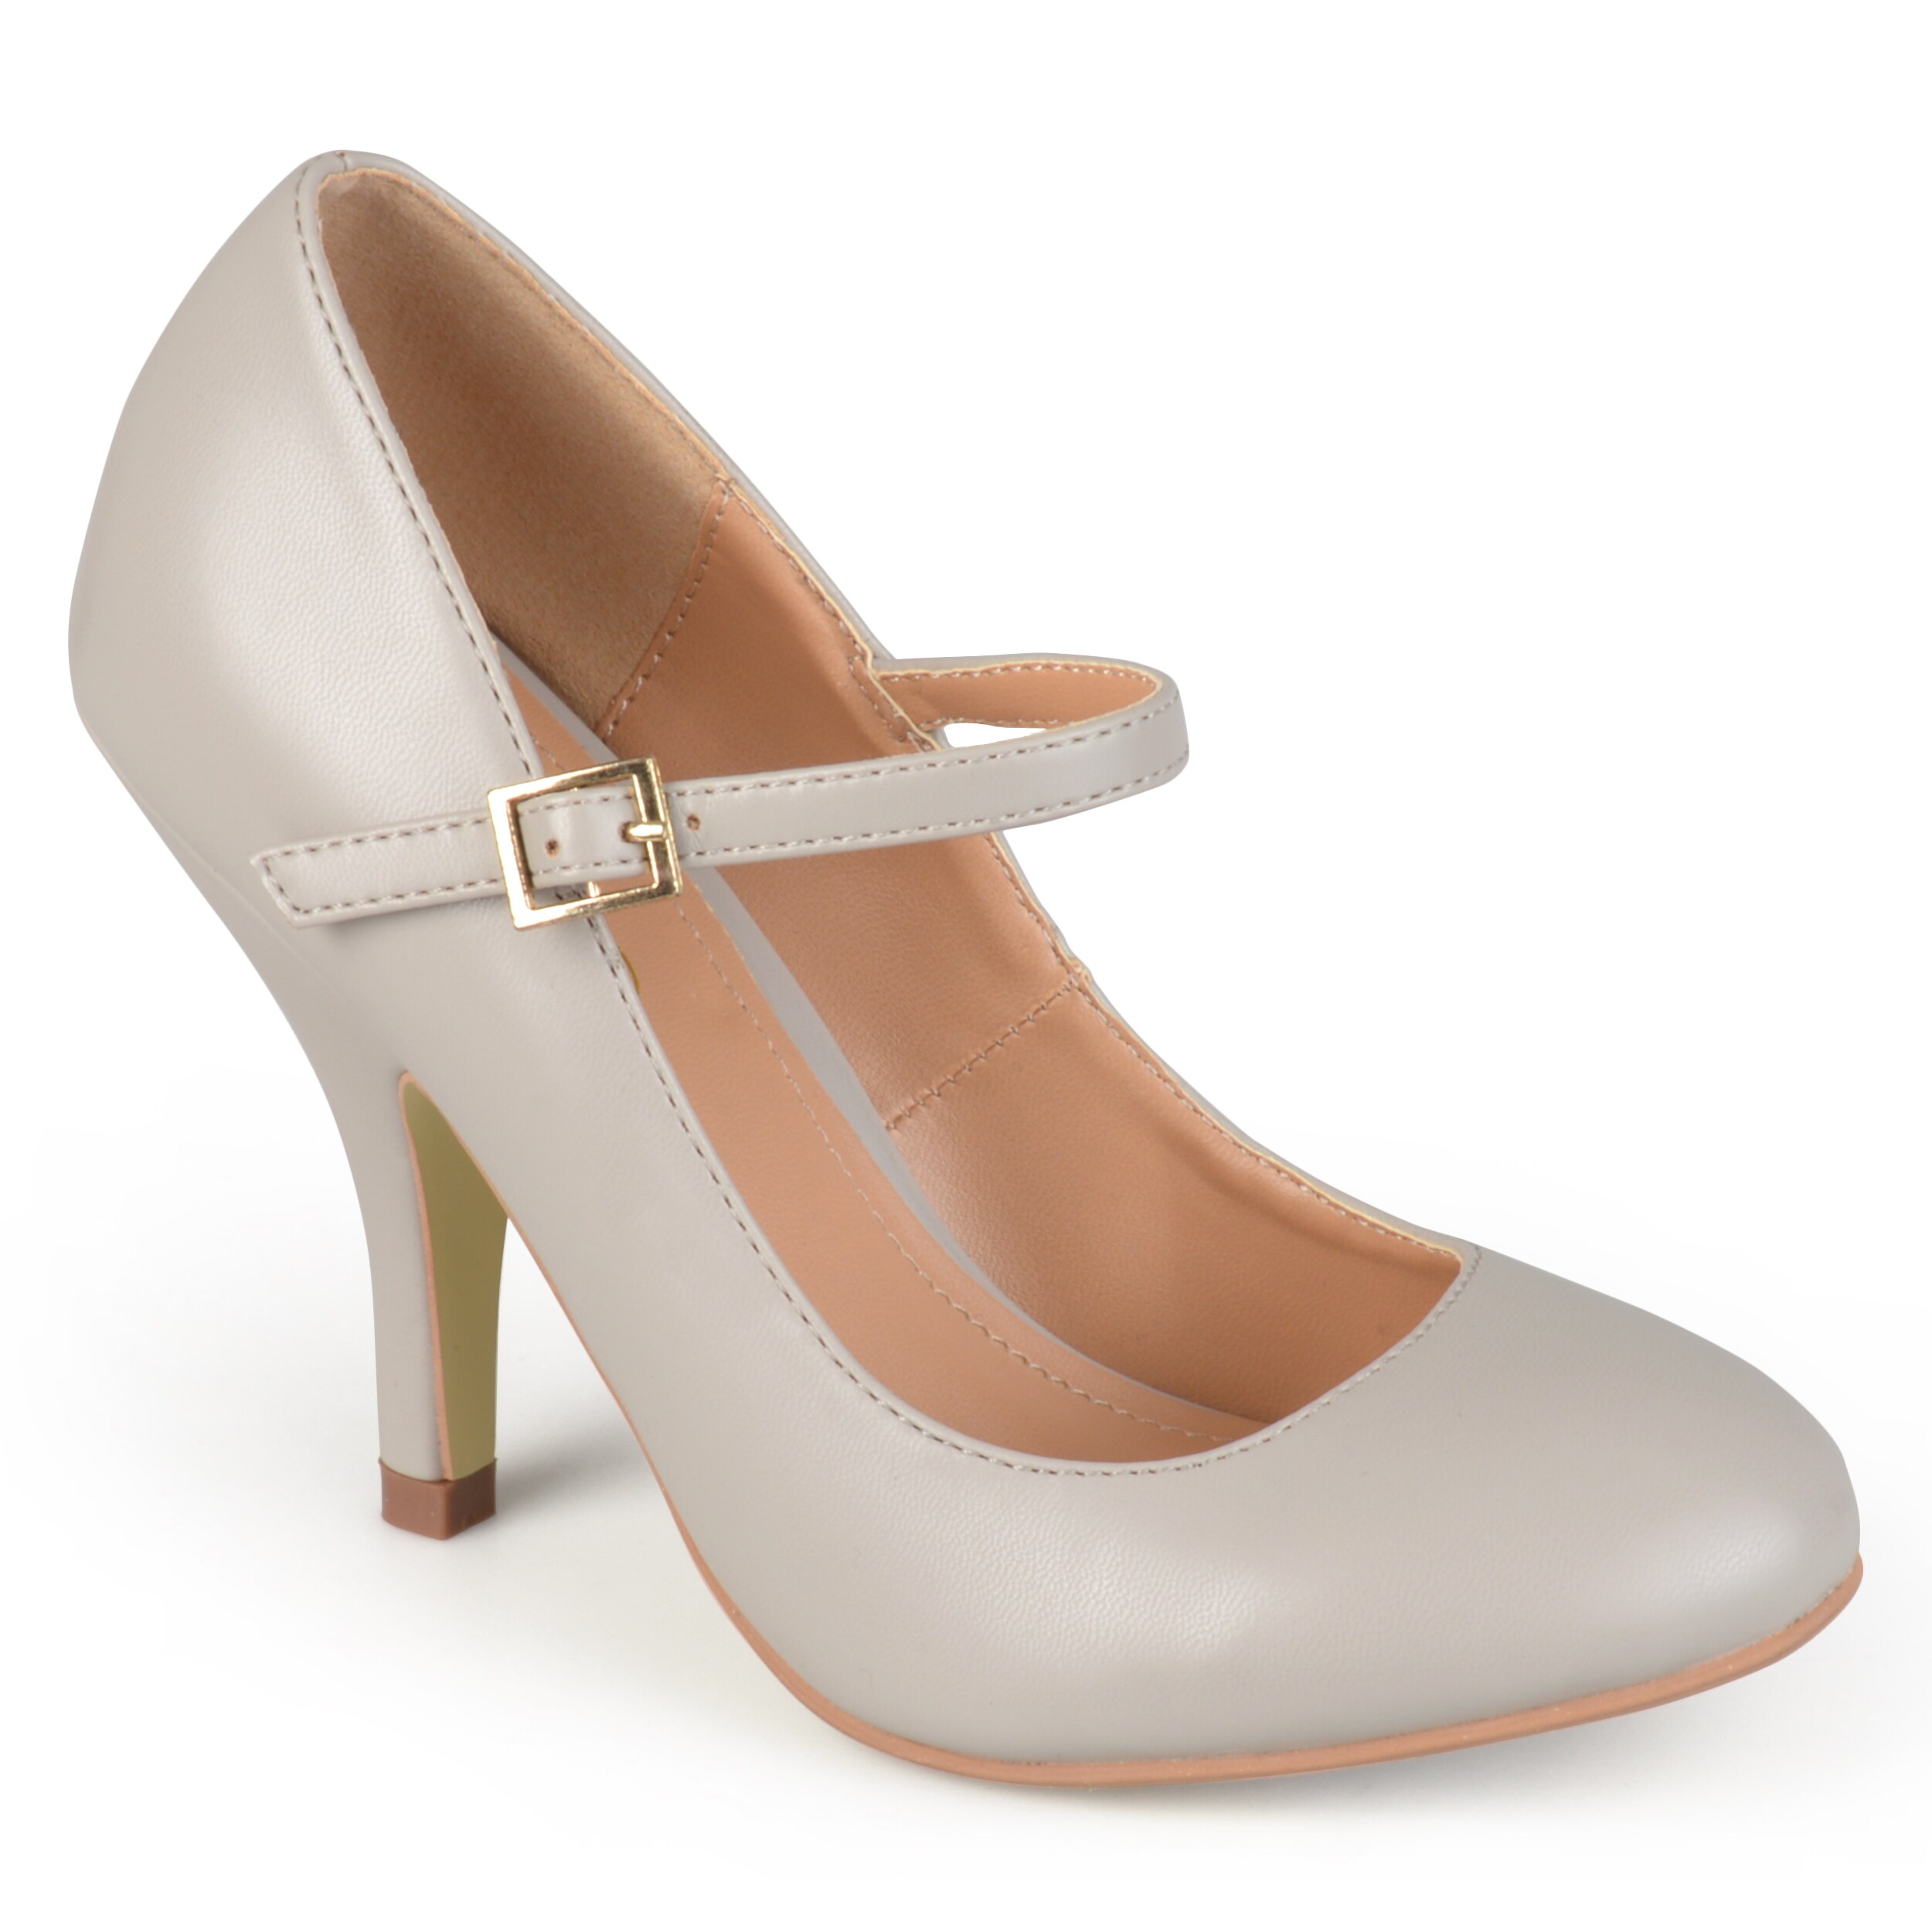 Journee Collection Womens WENDY-09 Patent Mary Jane Pumps